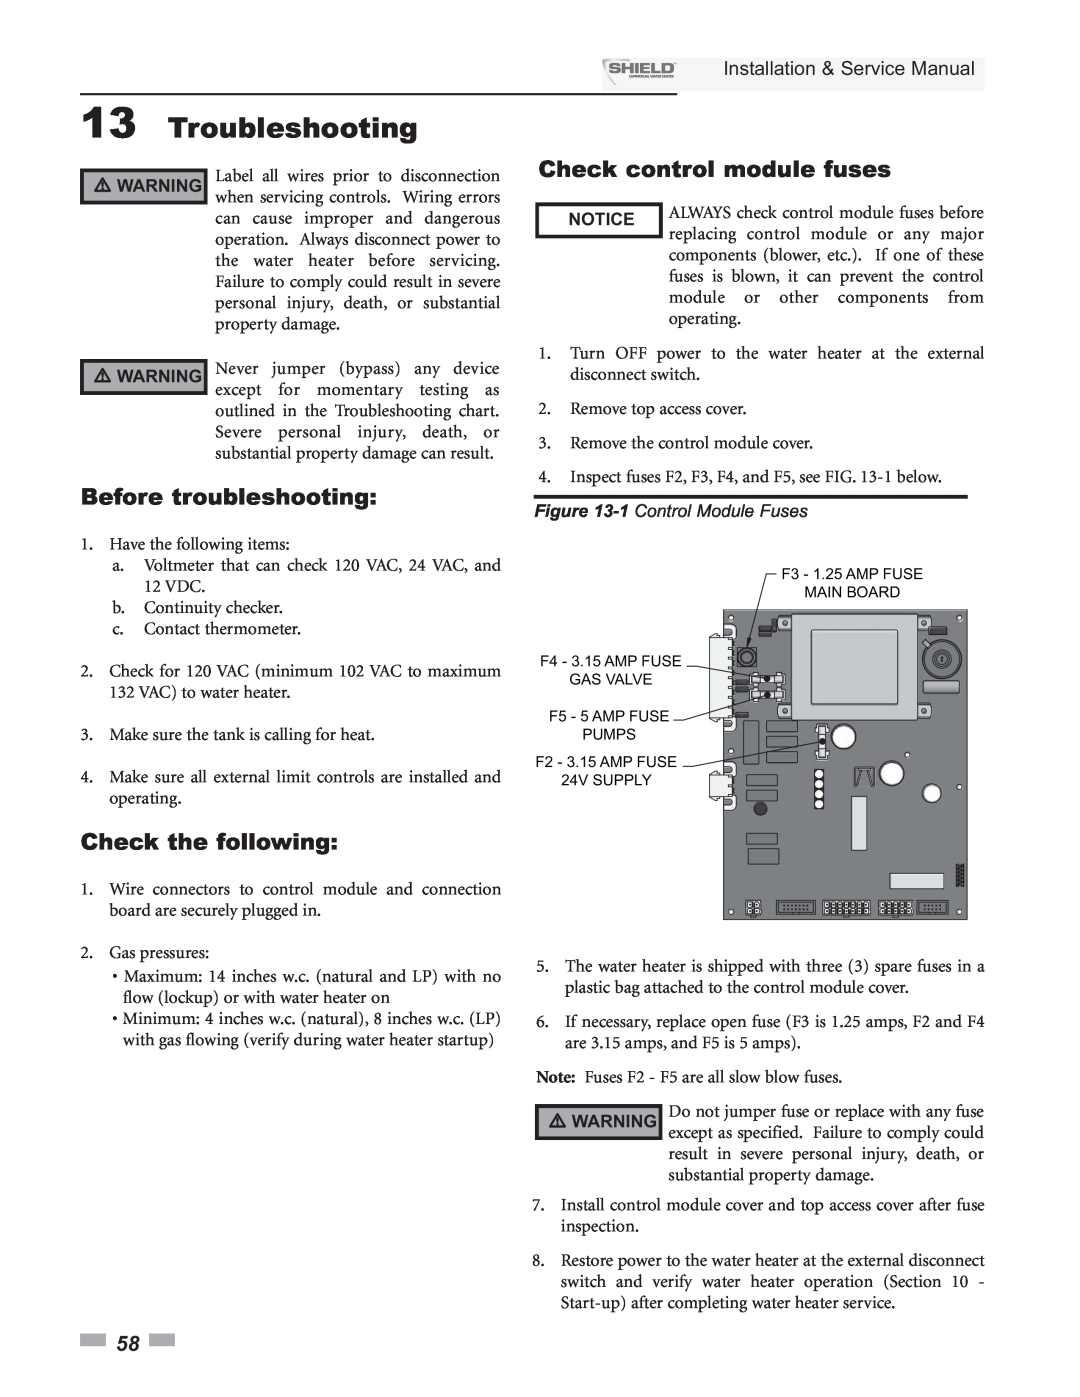 Lochinvar SNR150-100 Troubleshooting, Check control module fuses, Before troubleshooting, Check the following, Notice 